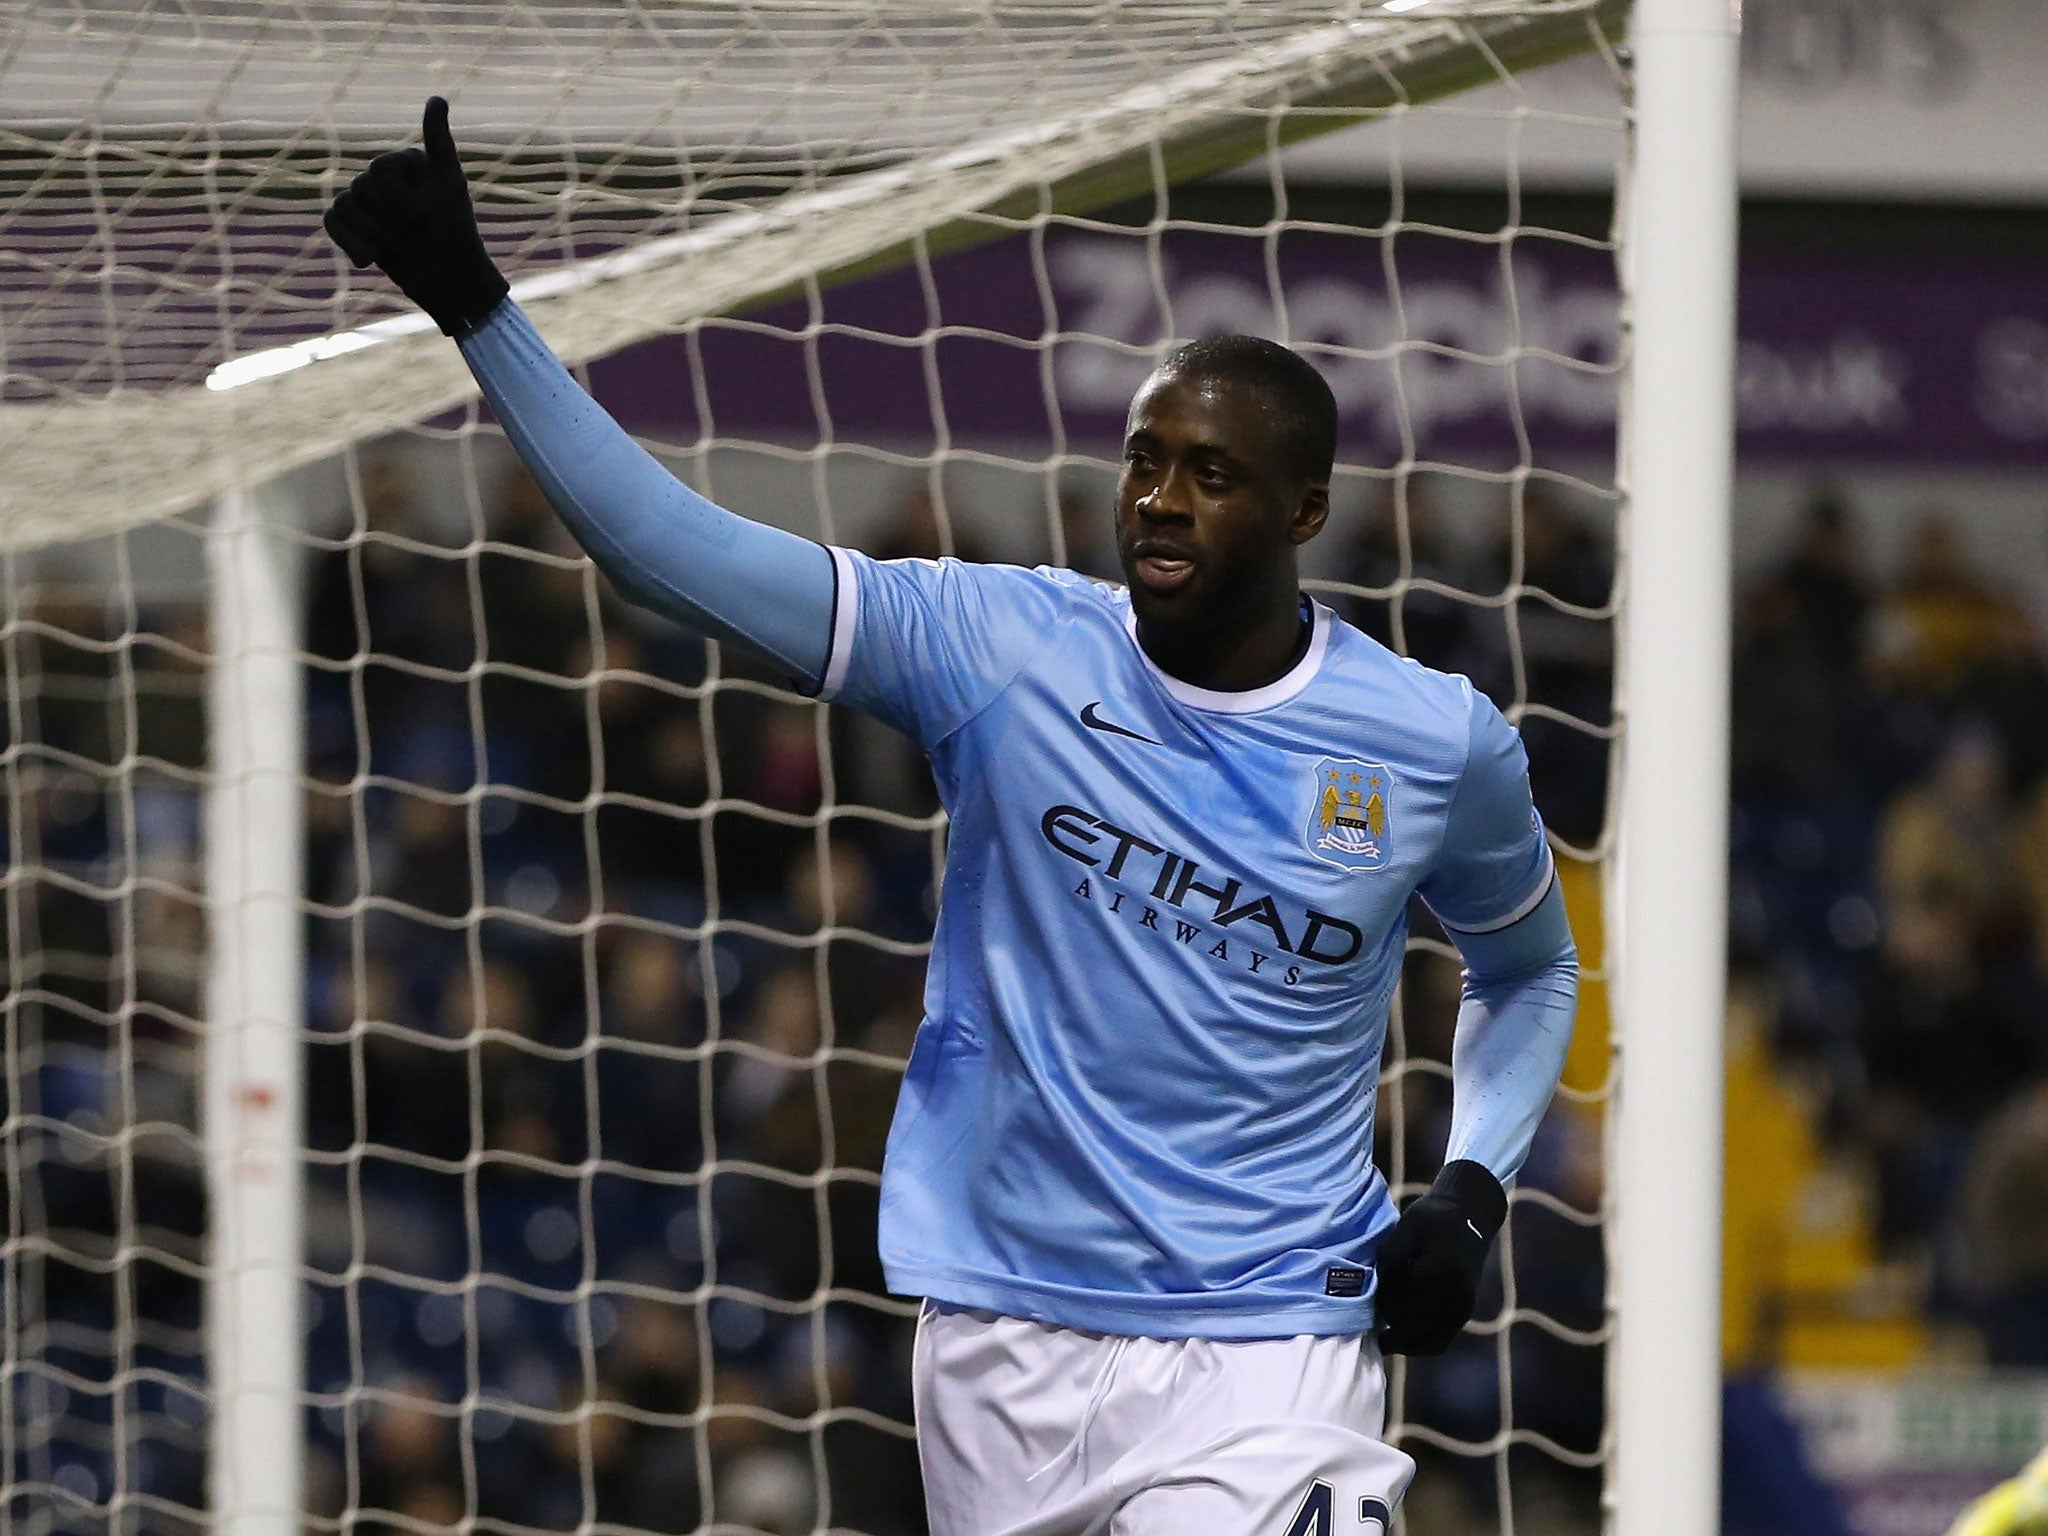 Manchester City midfielder Yaya Toure celebrates after scoring in the 3-2 win over West Brom